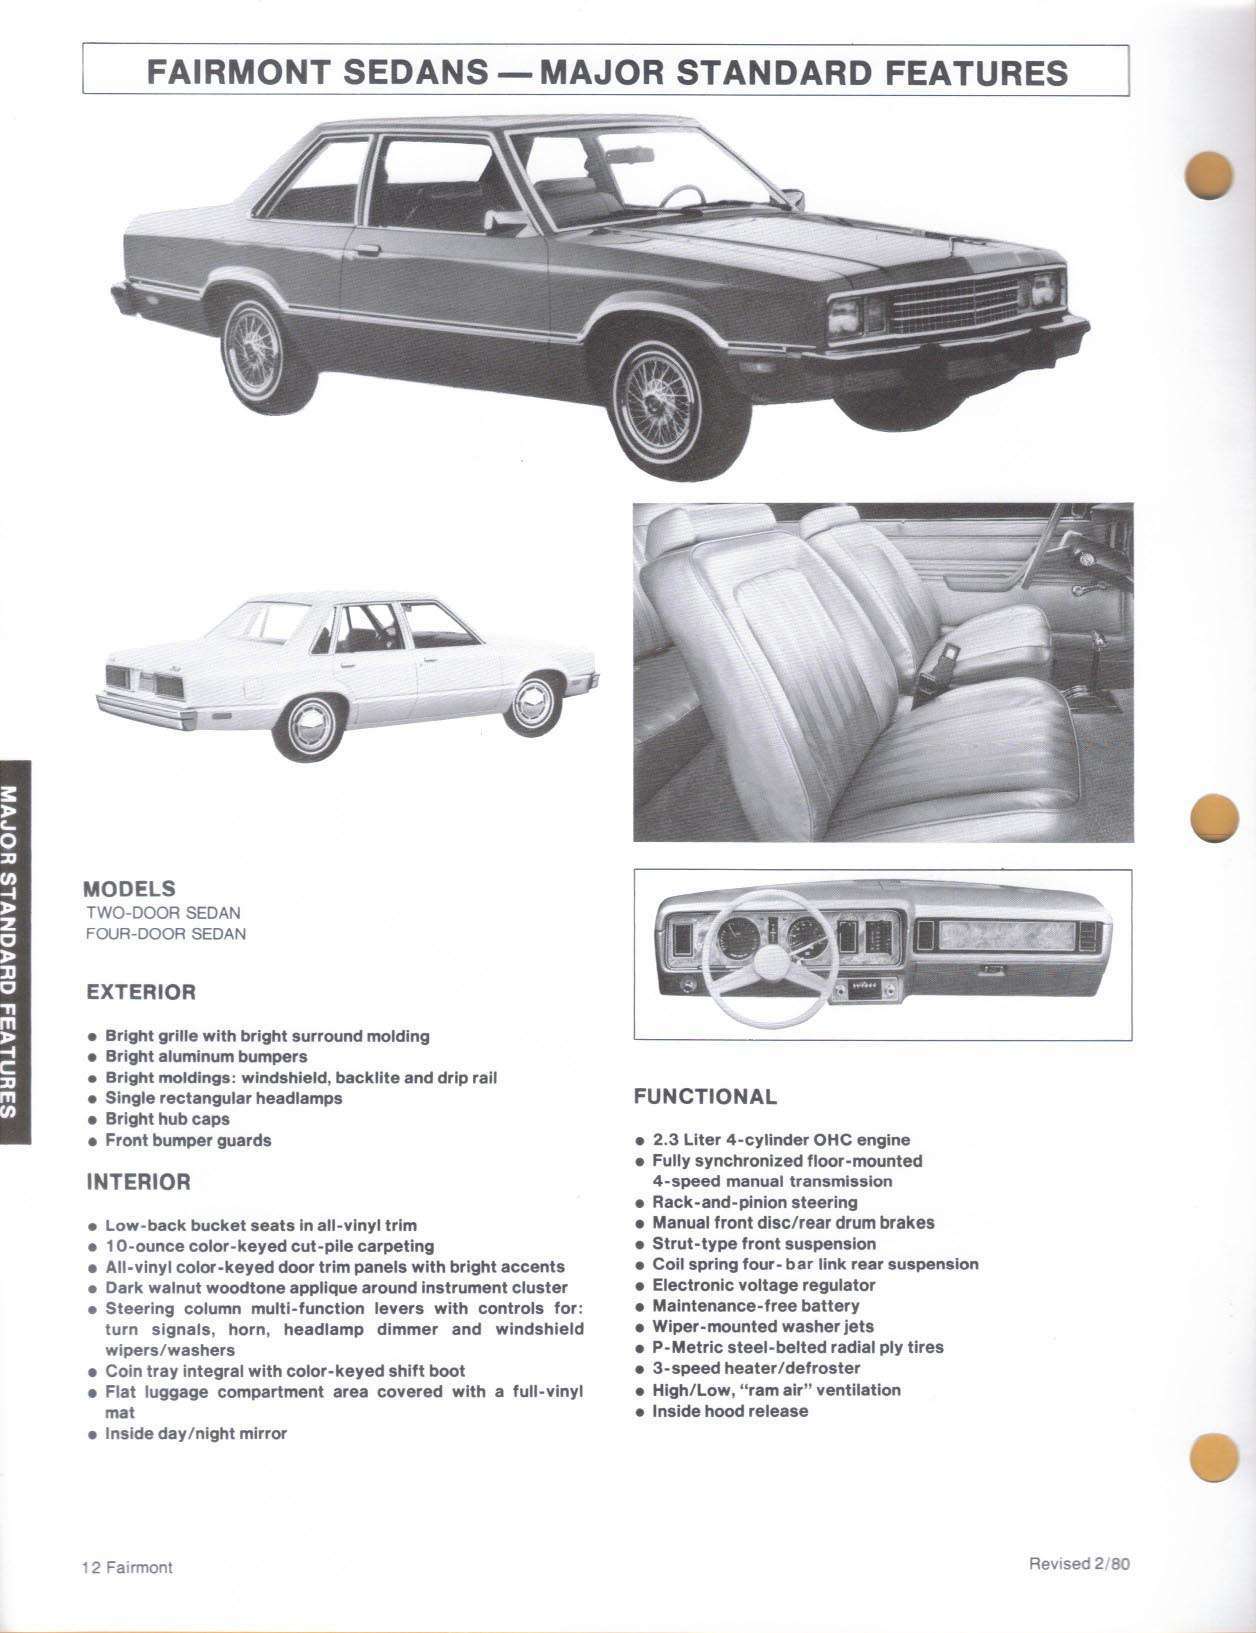 1980_Ford_Fairmont_Car_Facts-12